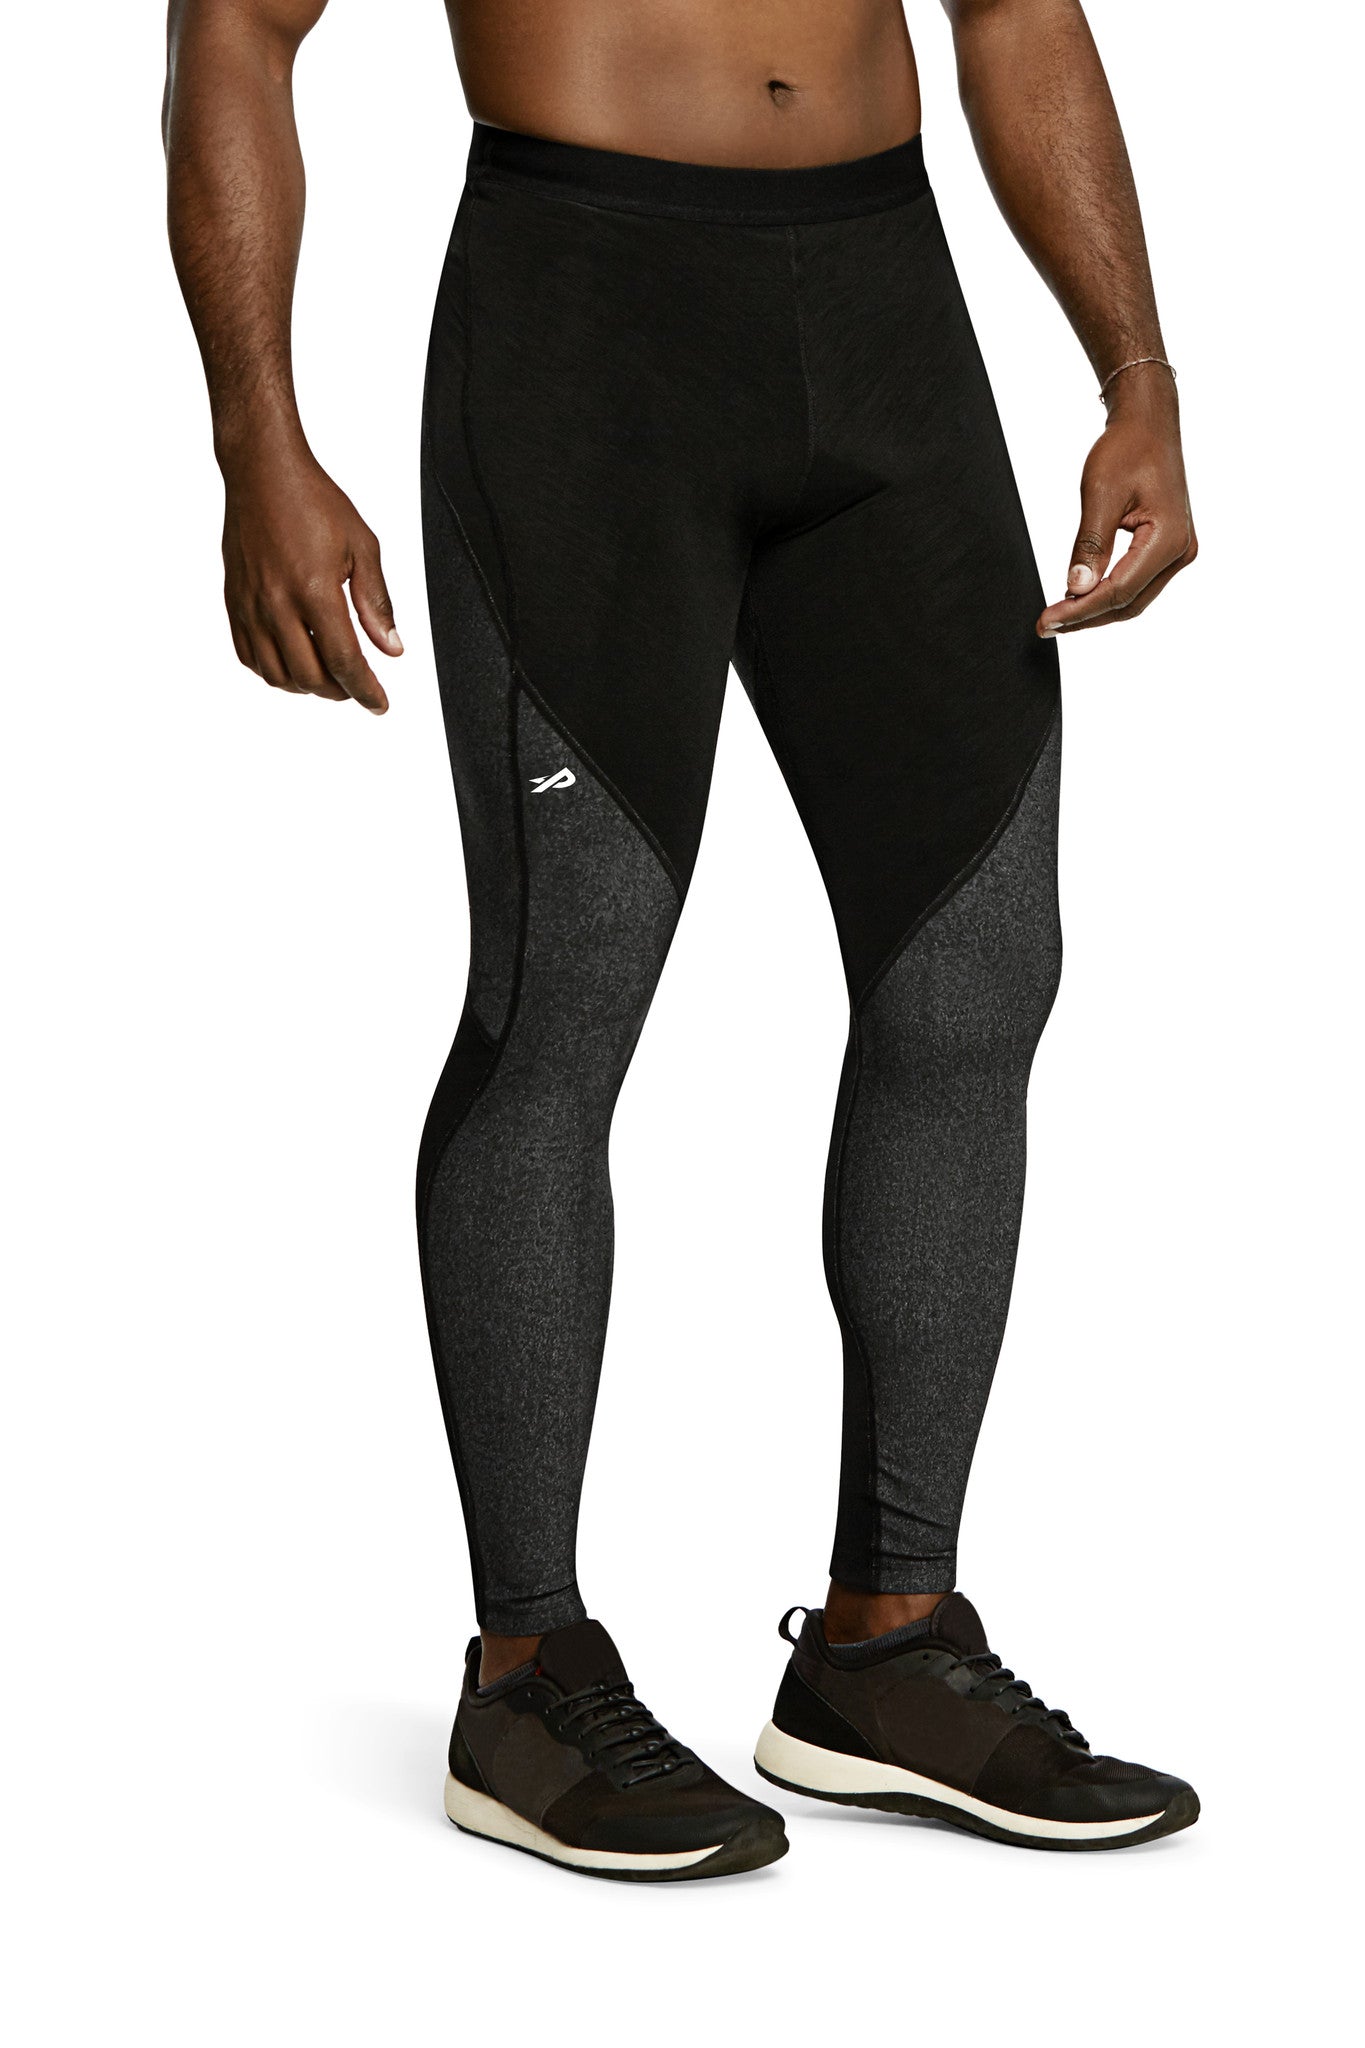 Pro Resistance Tights for Men - Athletic Grey